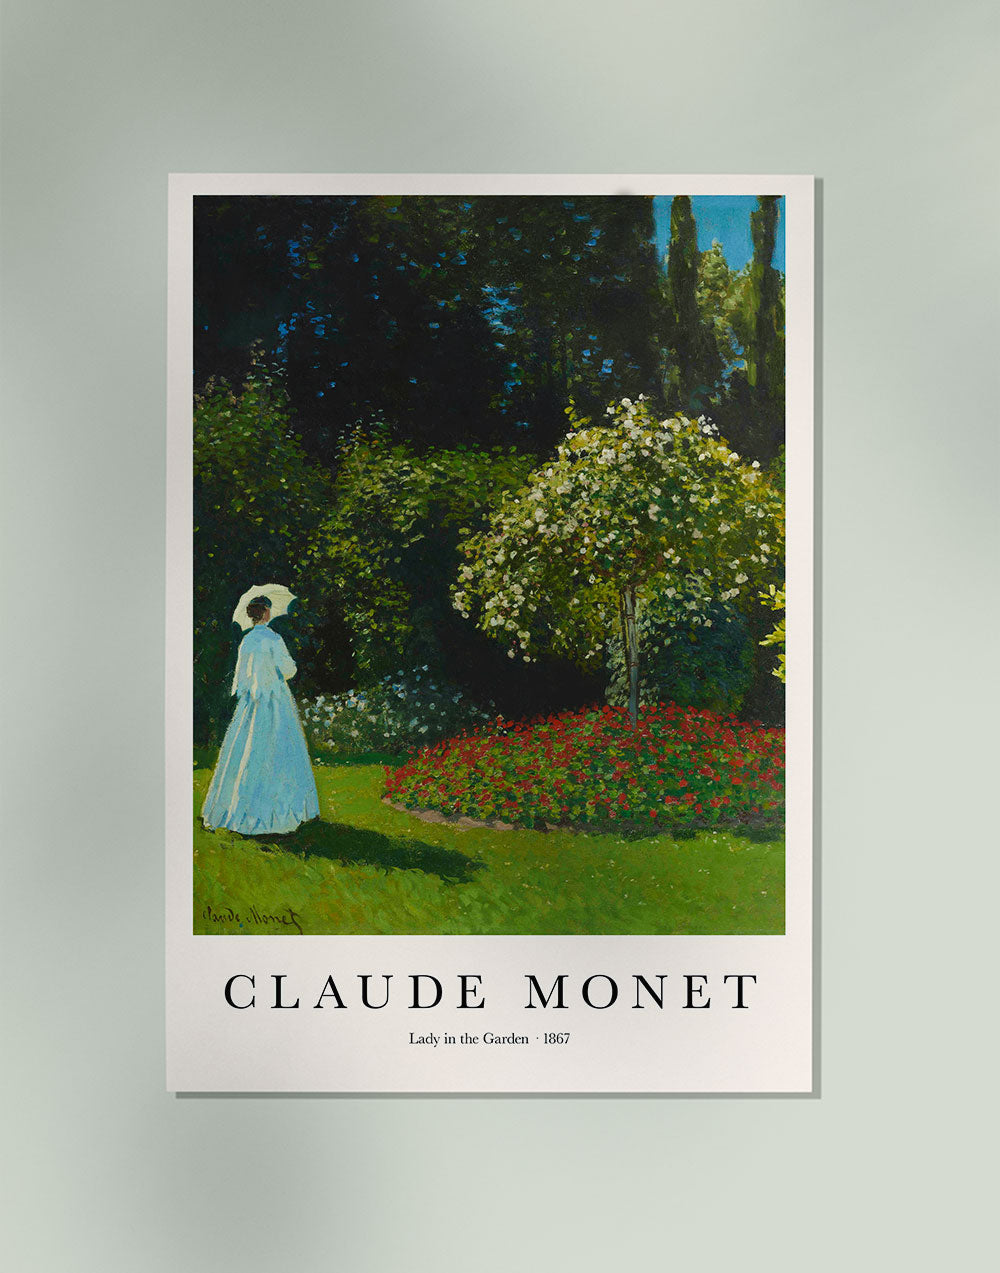 Lady in the Garden by Claude Monet Art Exhibition Poster